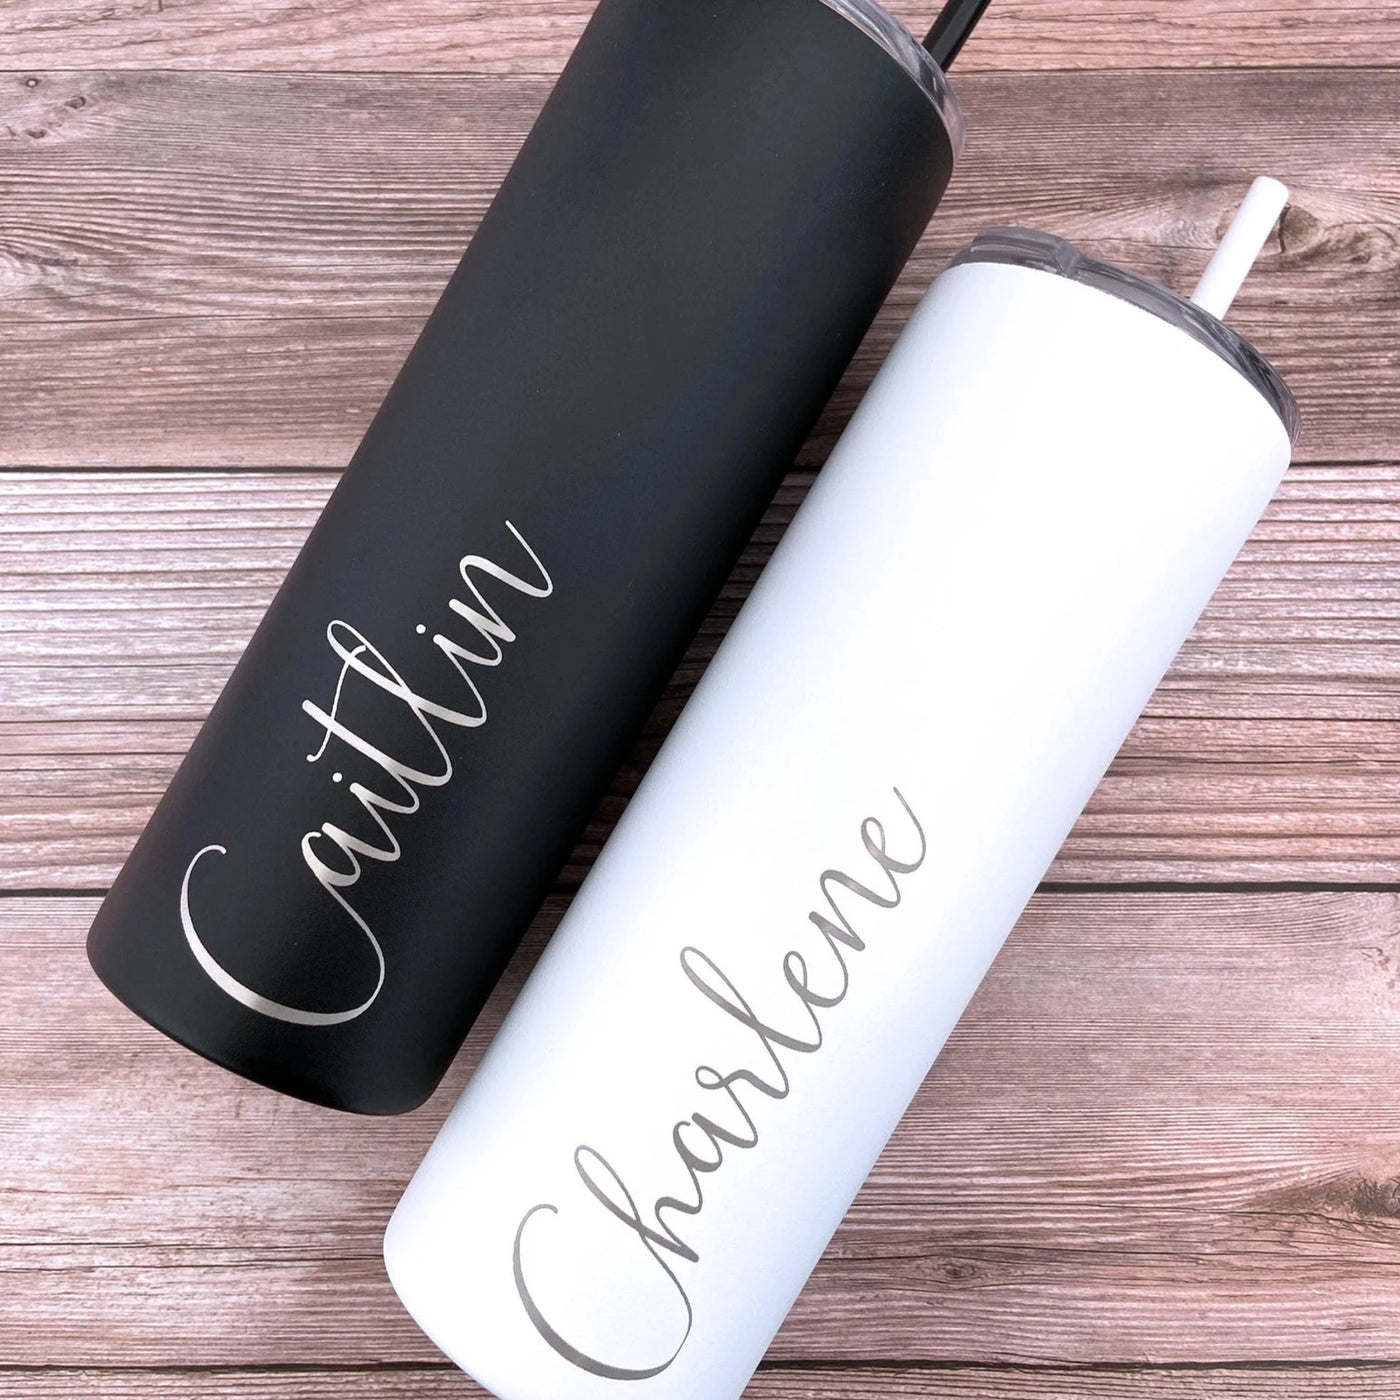 Stainless steel water tumbler that can be engraved with a name. Comes in black or white.